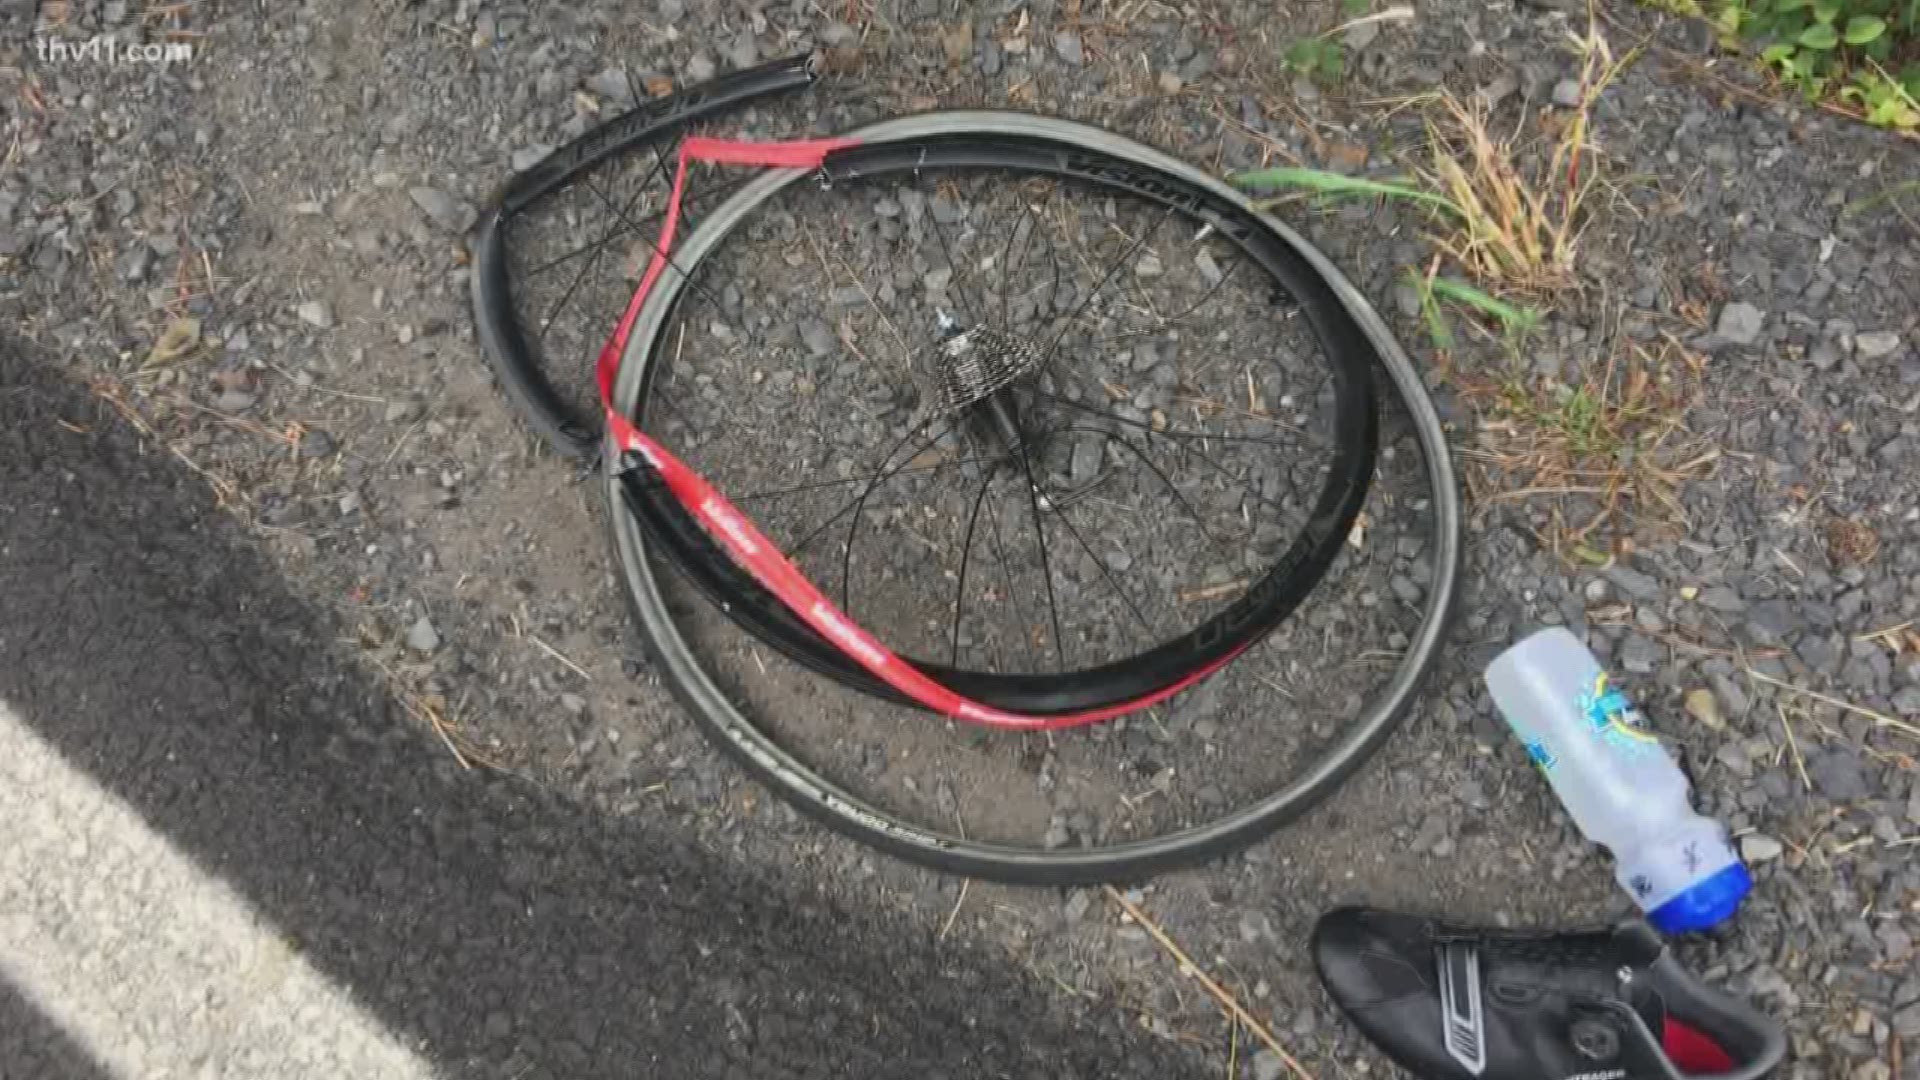 Another cyclist has was injured in a hit-and-run. But this time, the man walked away alive.